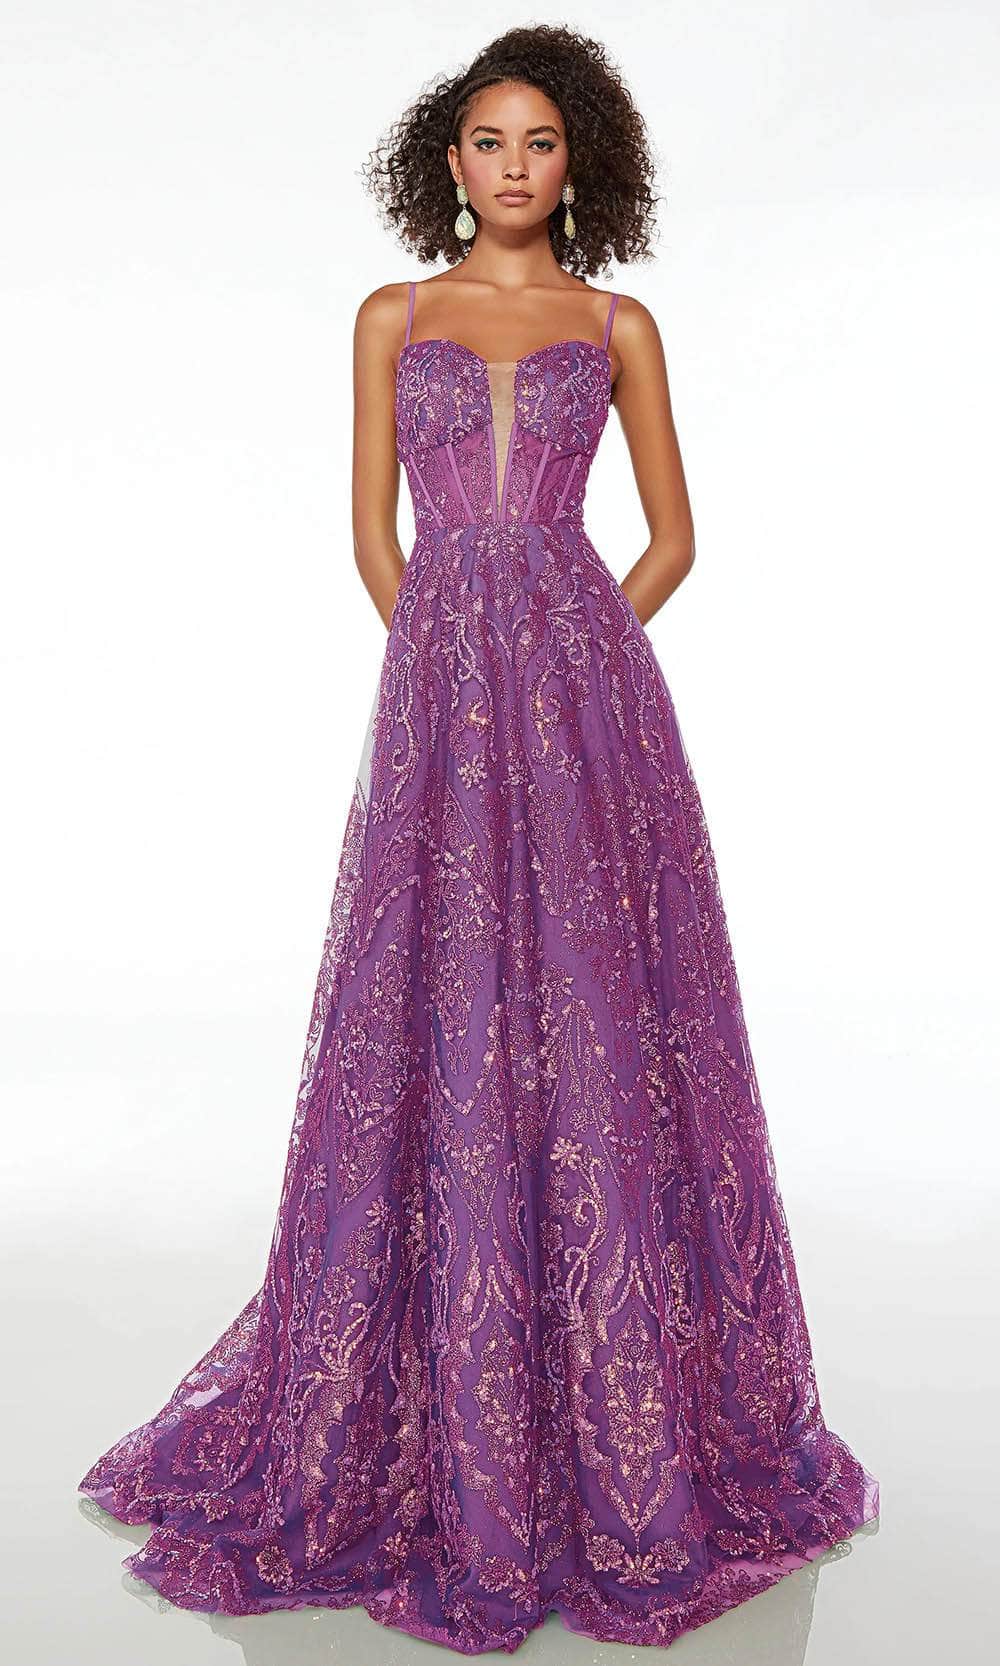 Alyce Paris 61581 - Plunging Sweetheart Prom Gown Special Occasion Dresses